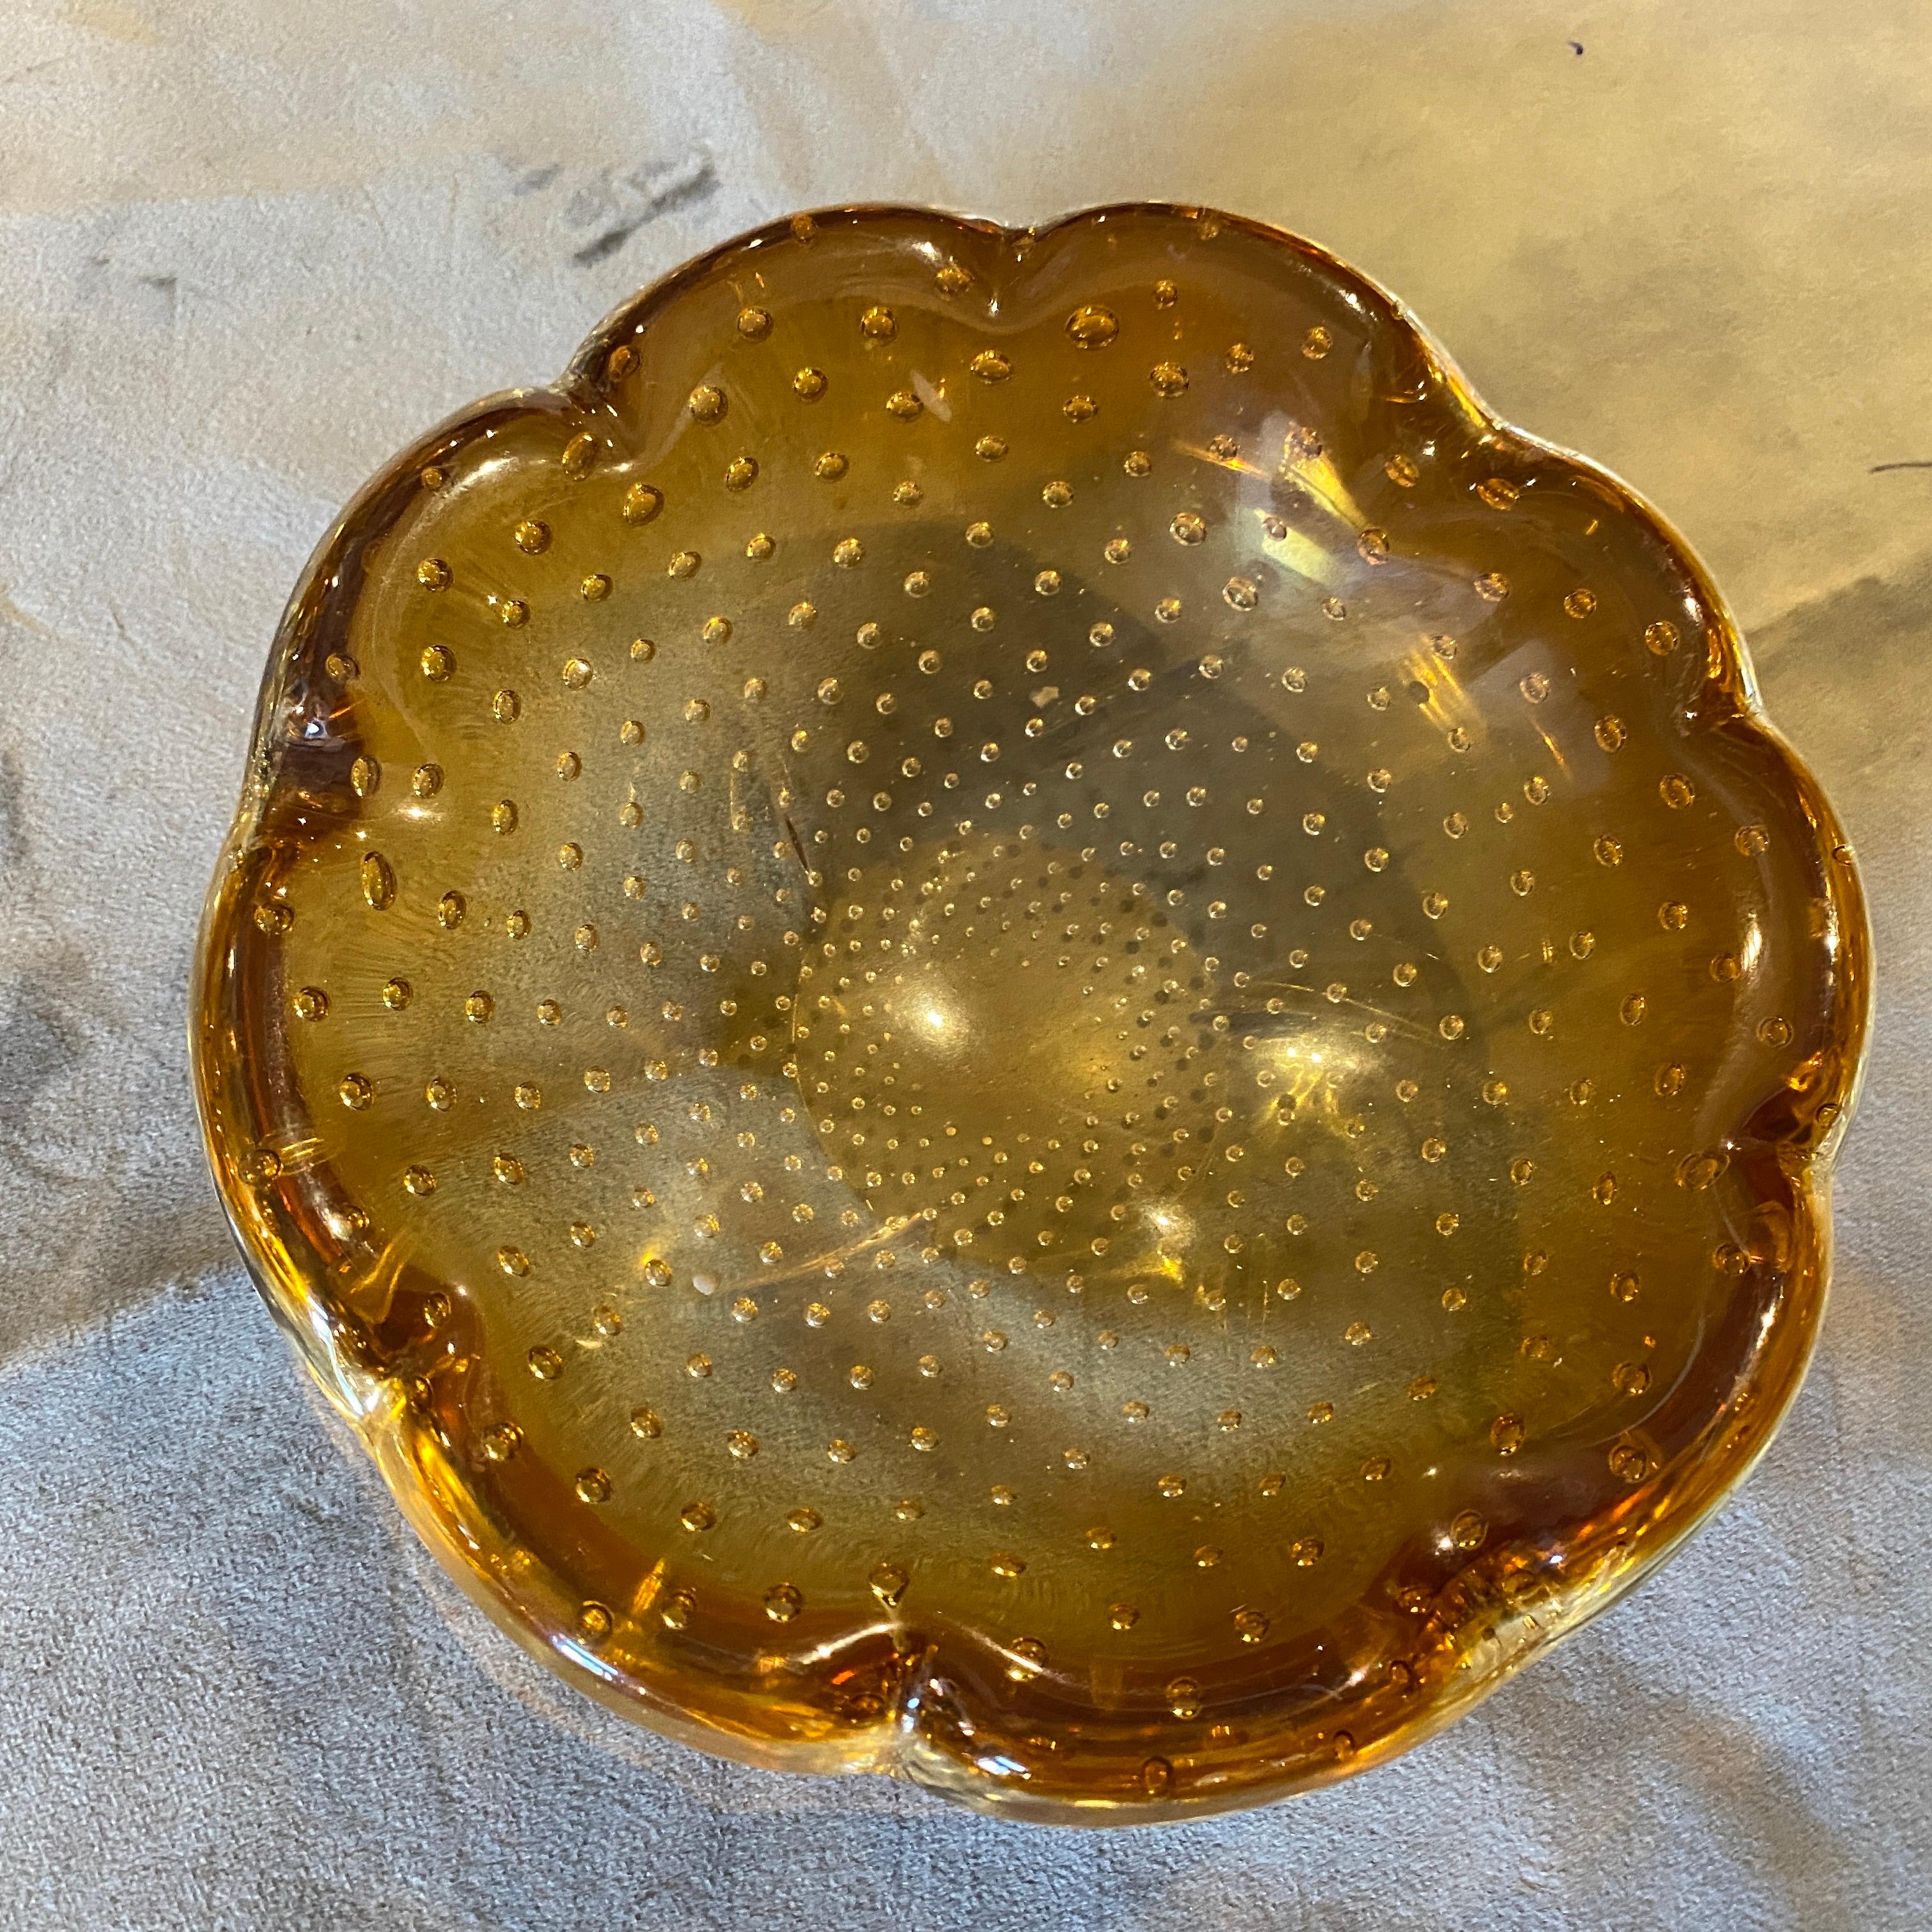 A bullicante brown murano glass ashtray in the style of Barovier, it has been made in Italy in the Seventies, it's in perfect conditions. This Murano Glass Ashtray is a masterpiece that harmoniously blends art and functionality. It stands as a